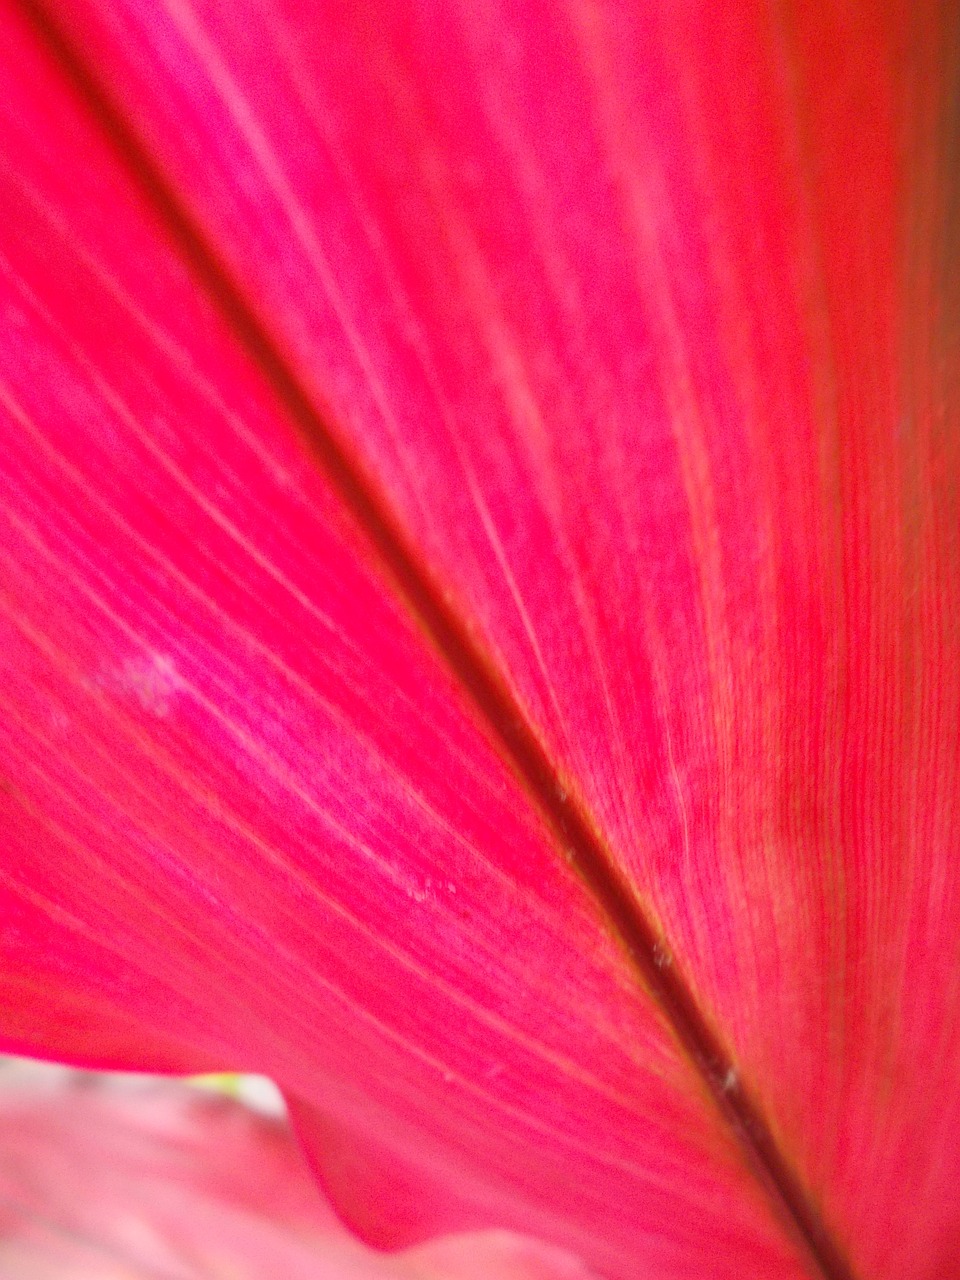 Sheet,pink,veins,nature,free pictures - free image from needpix.com